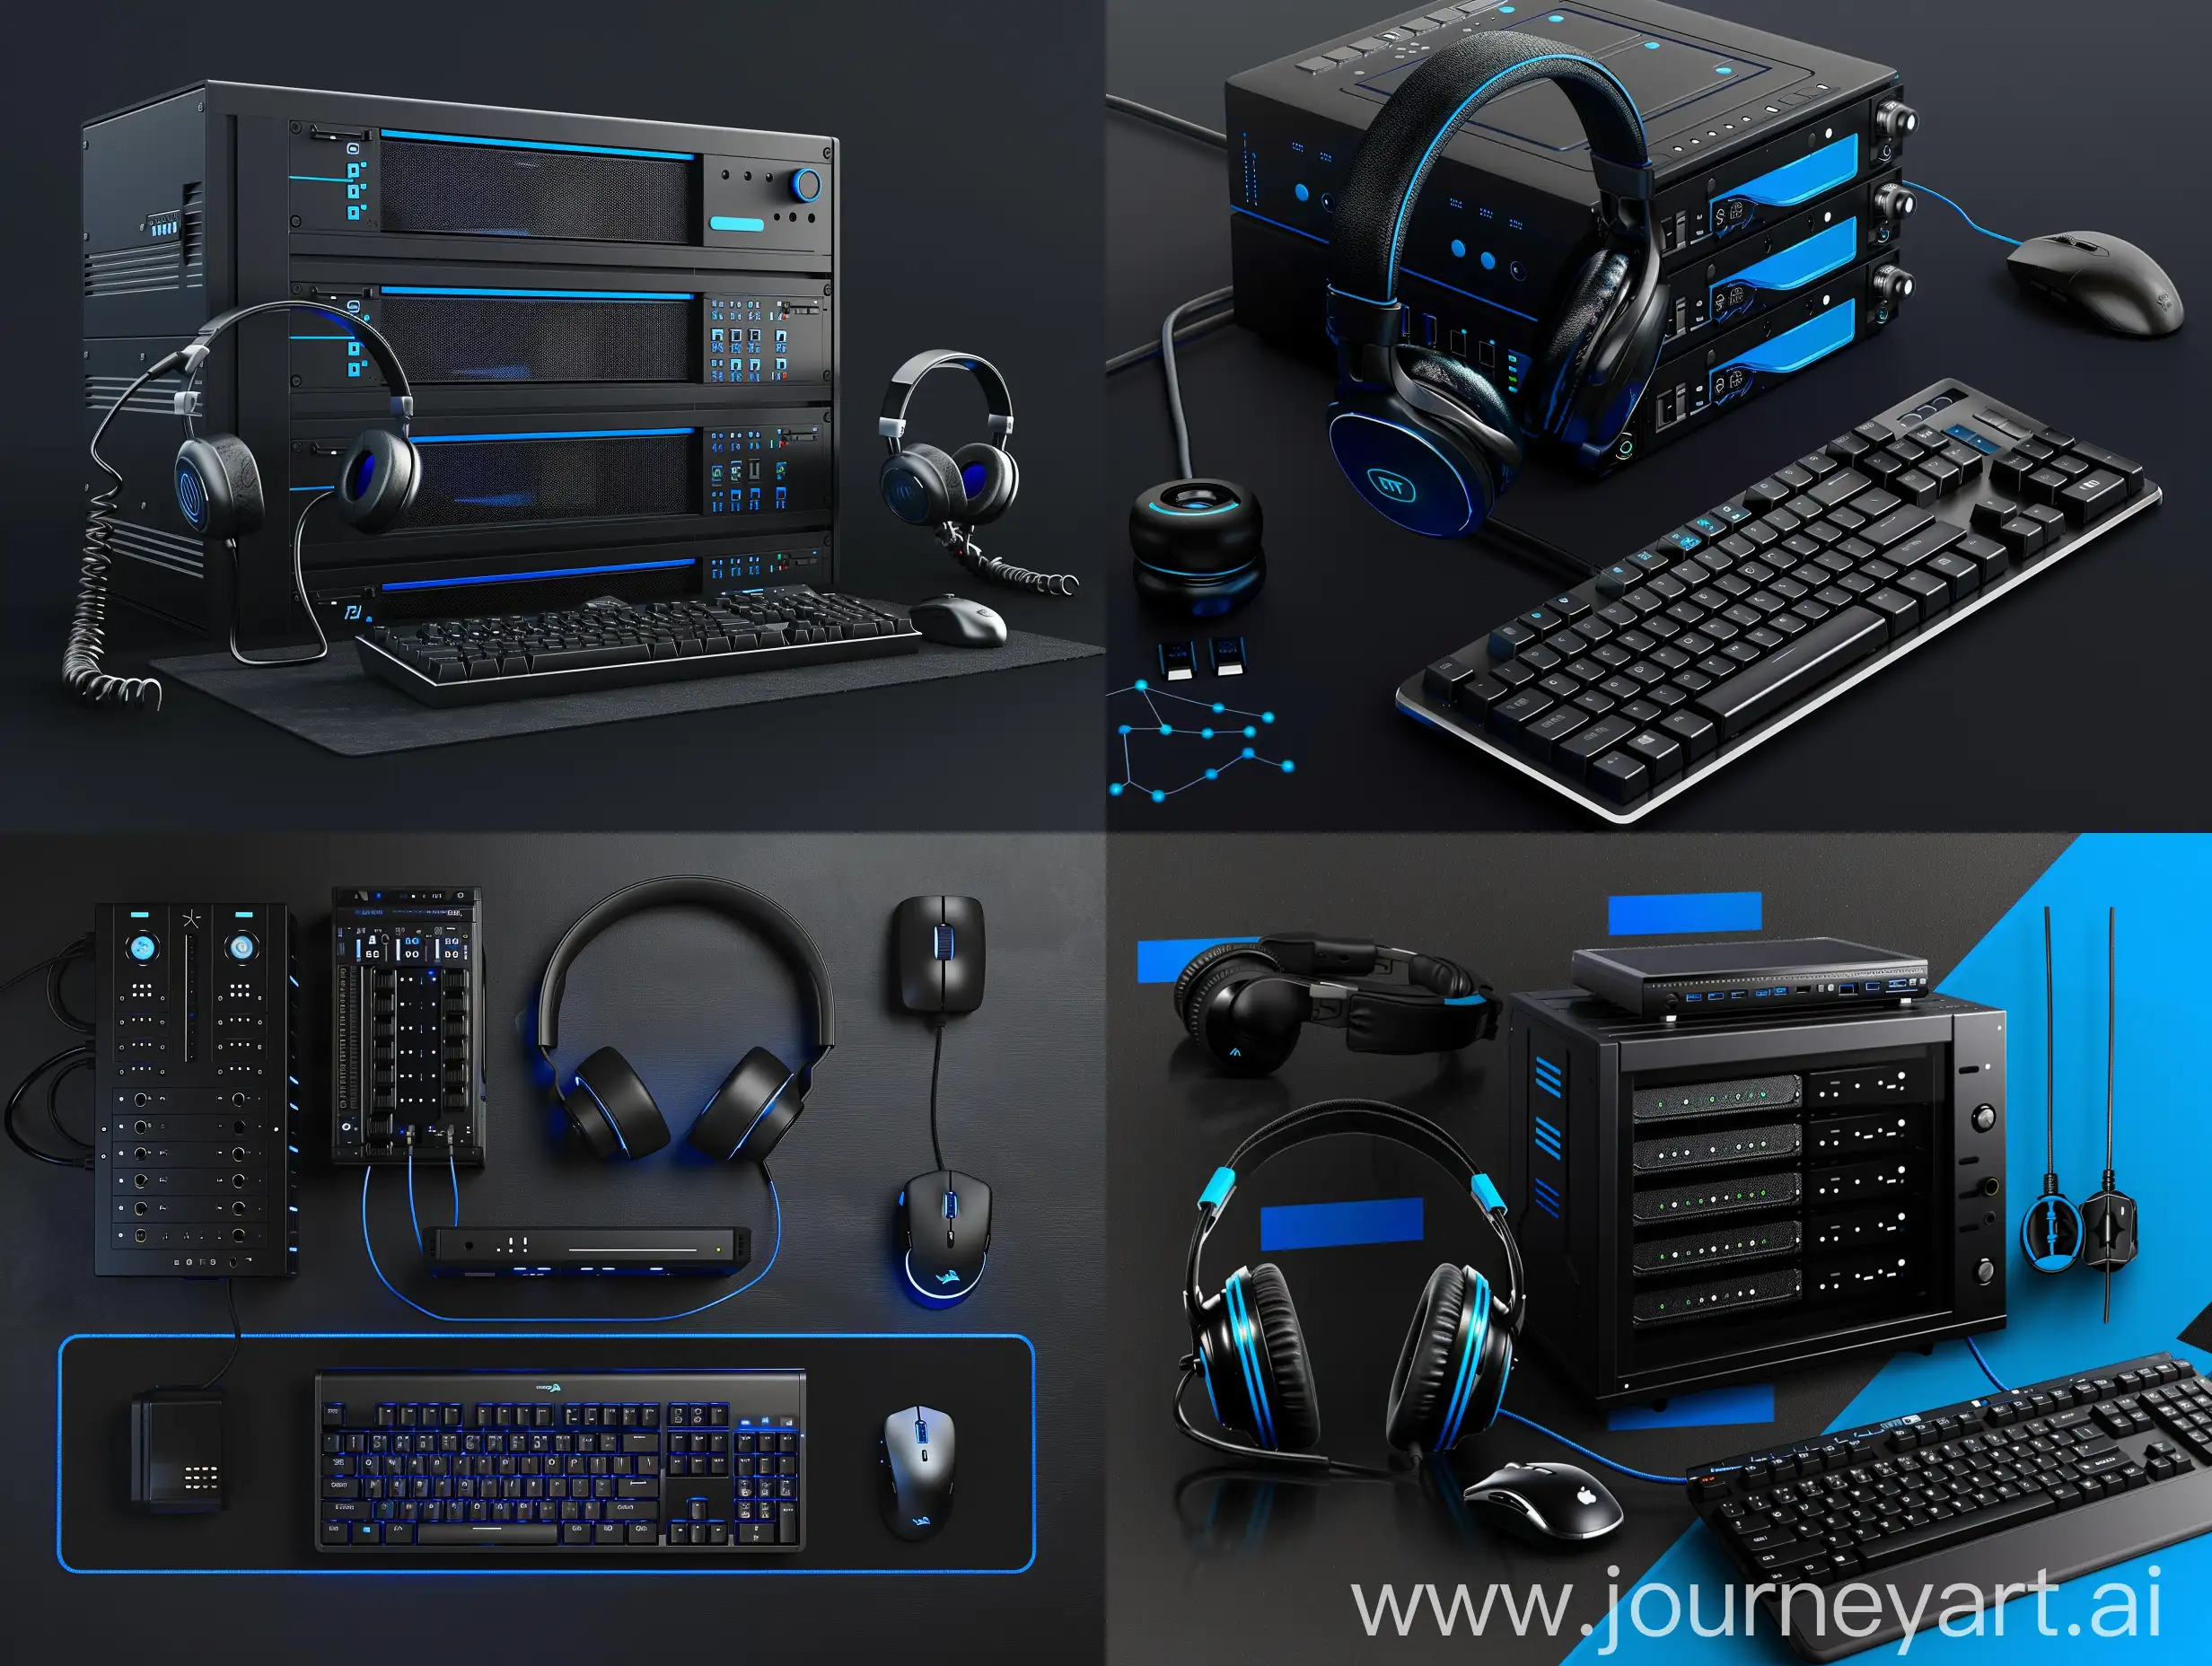 Professional-Server-Setup-with-Headset-and-Accessories-on-Black-Background